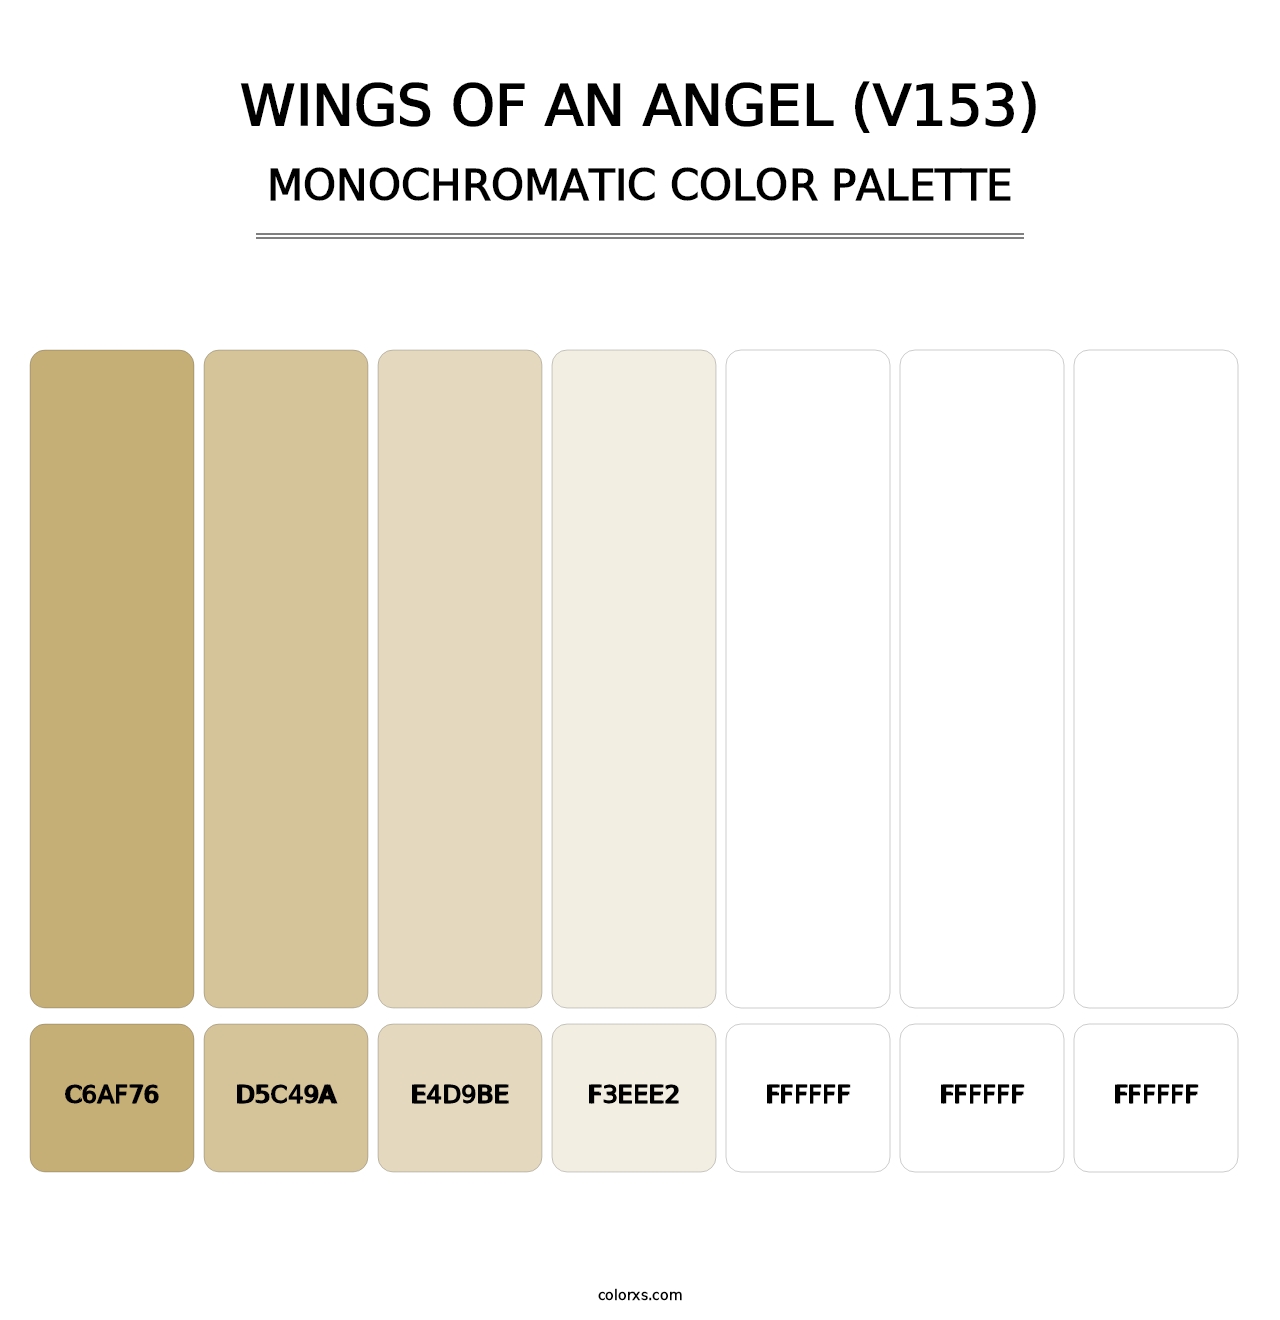 Wings of an Angel (V153) - Monochromatic Color Palette